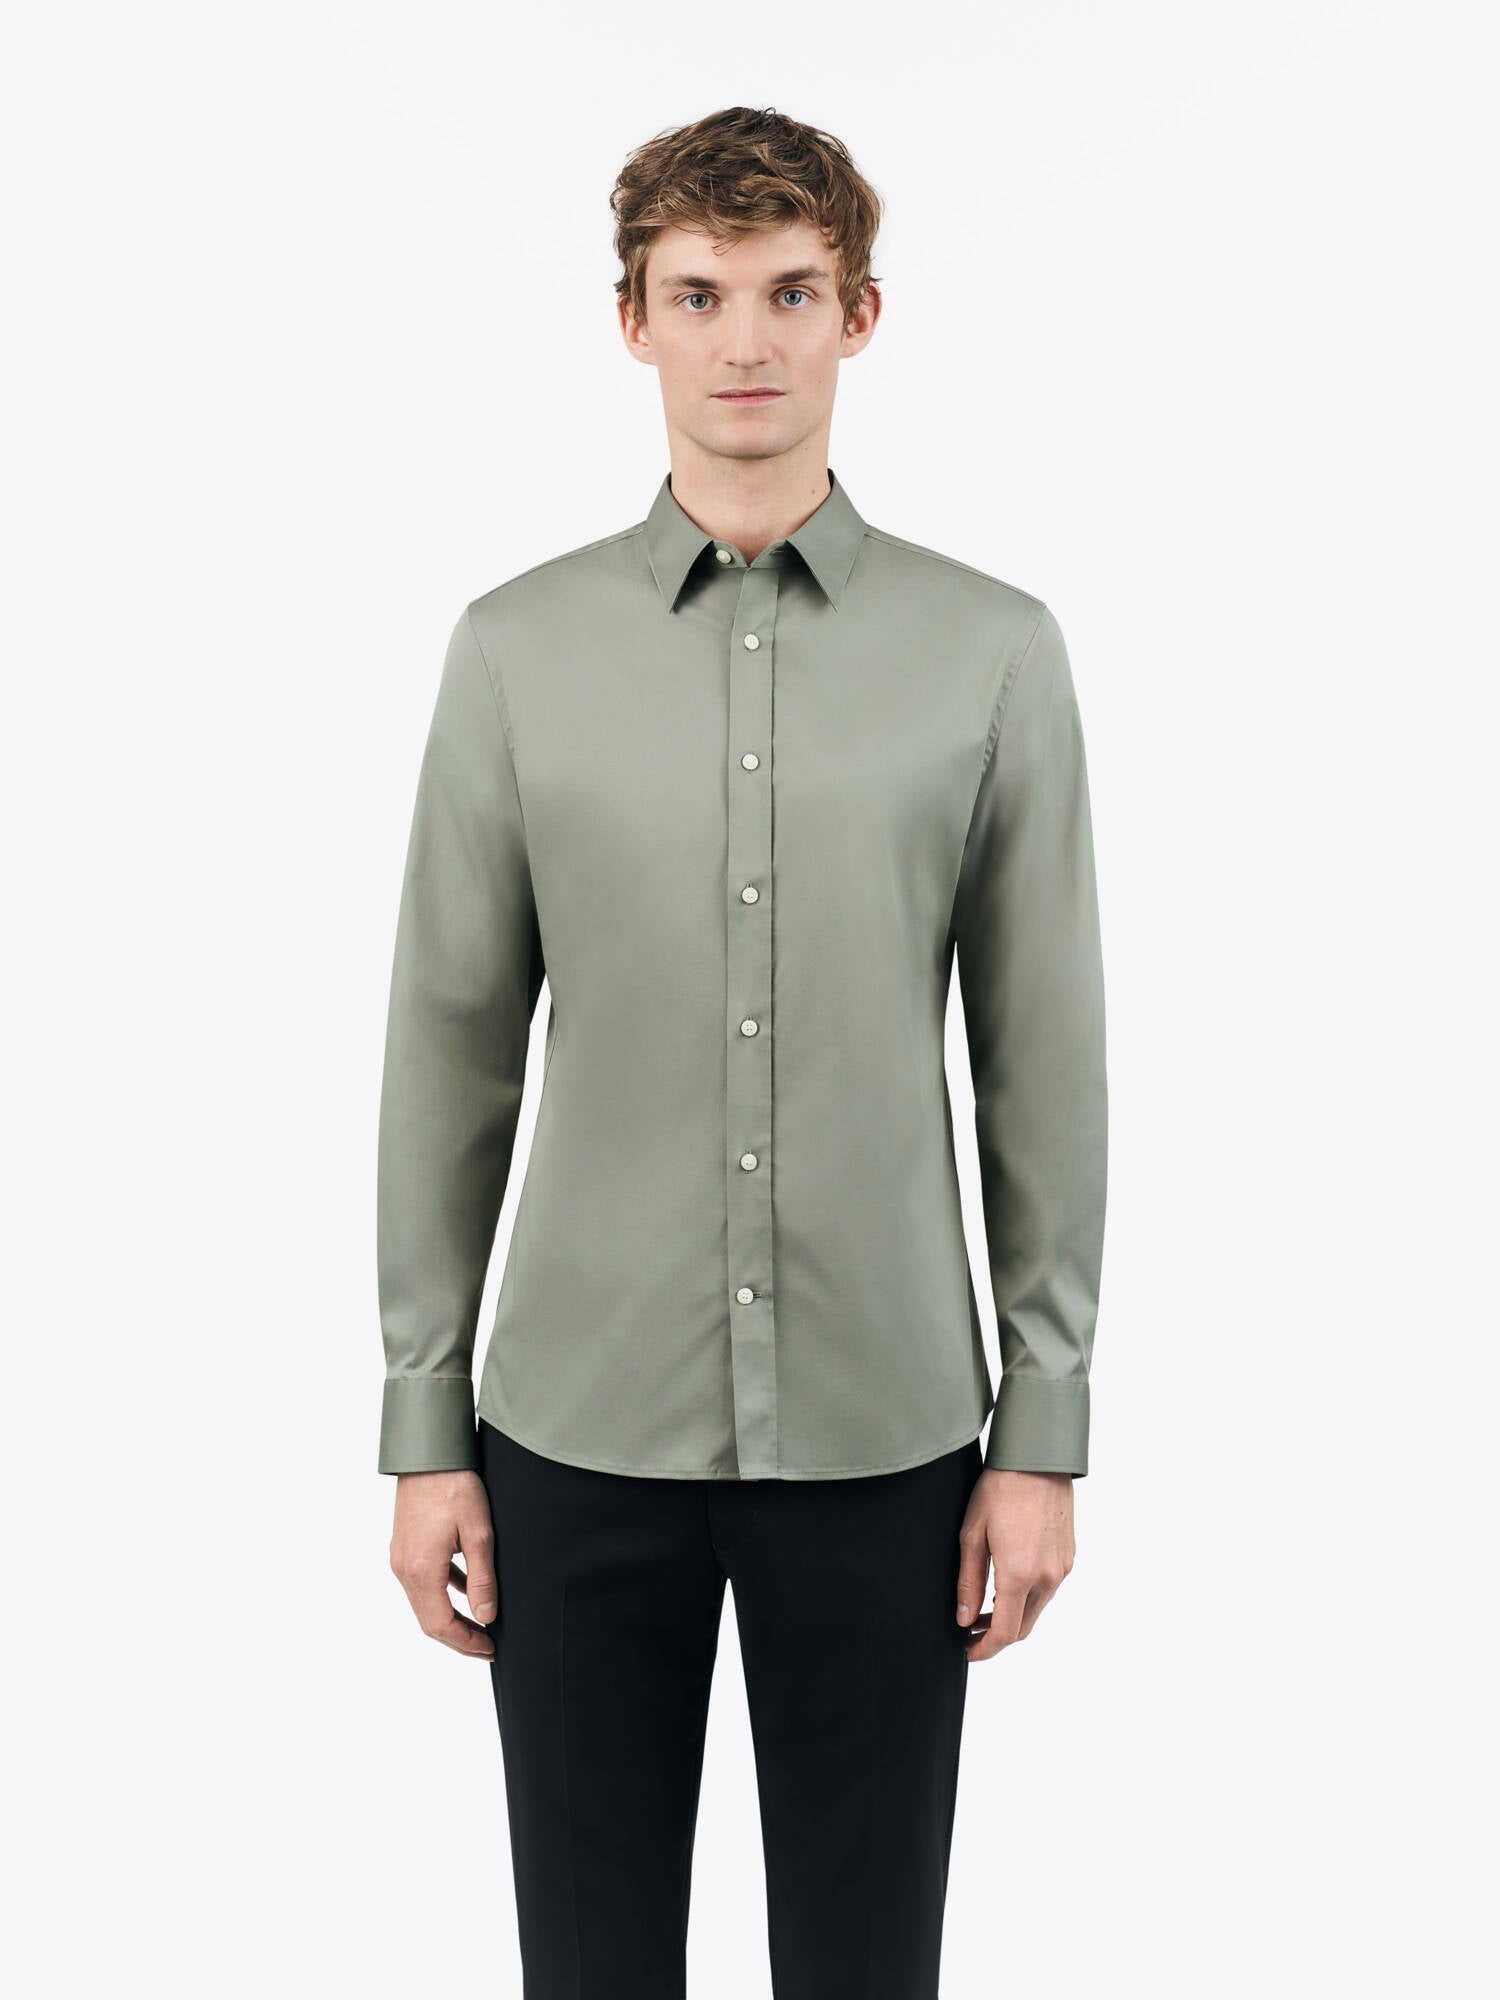 TIGER OF SWEDEN Adley Shirt in Grey T68997045| eightywingold 